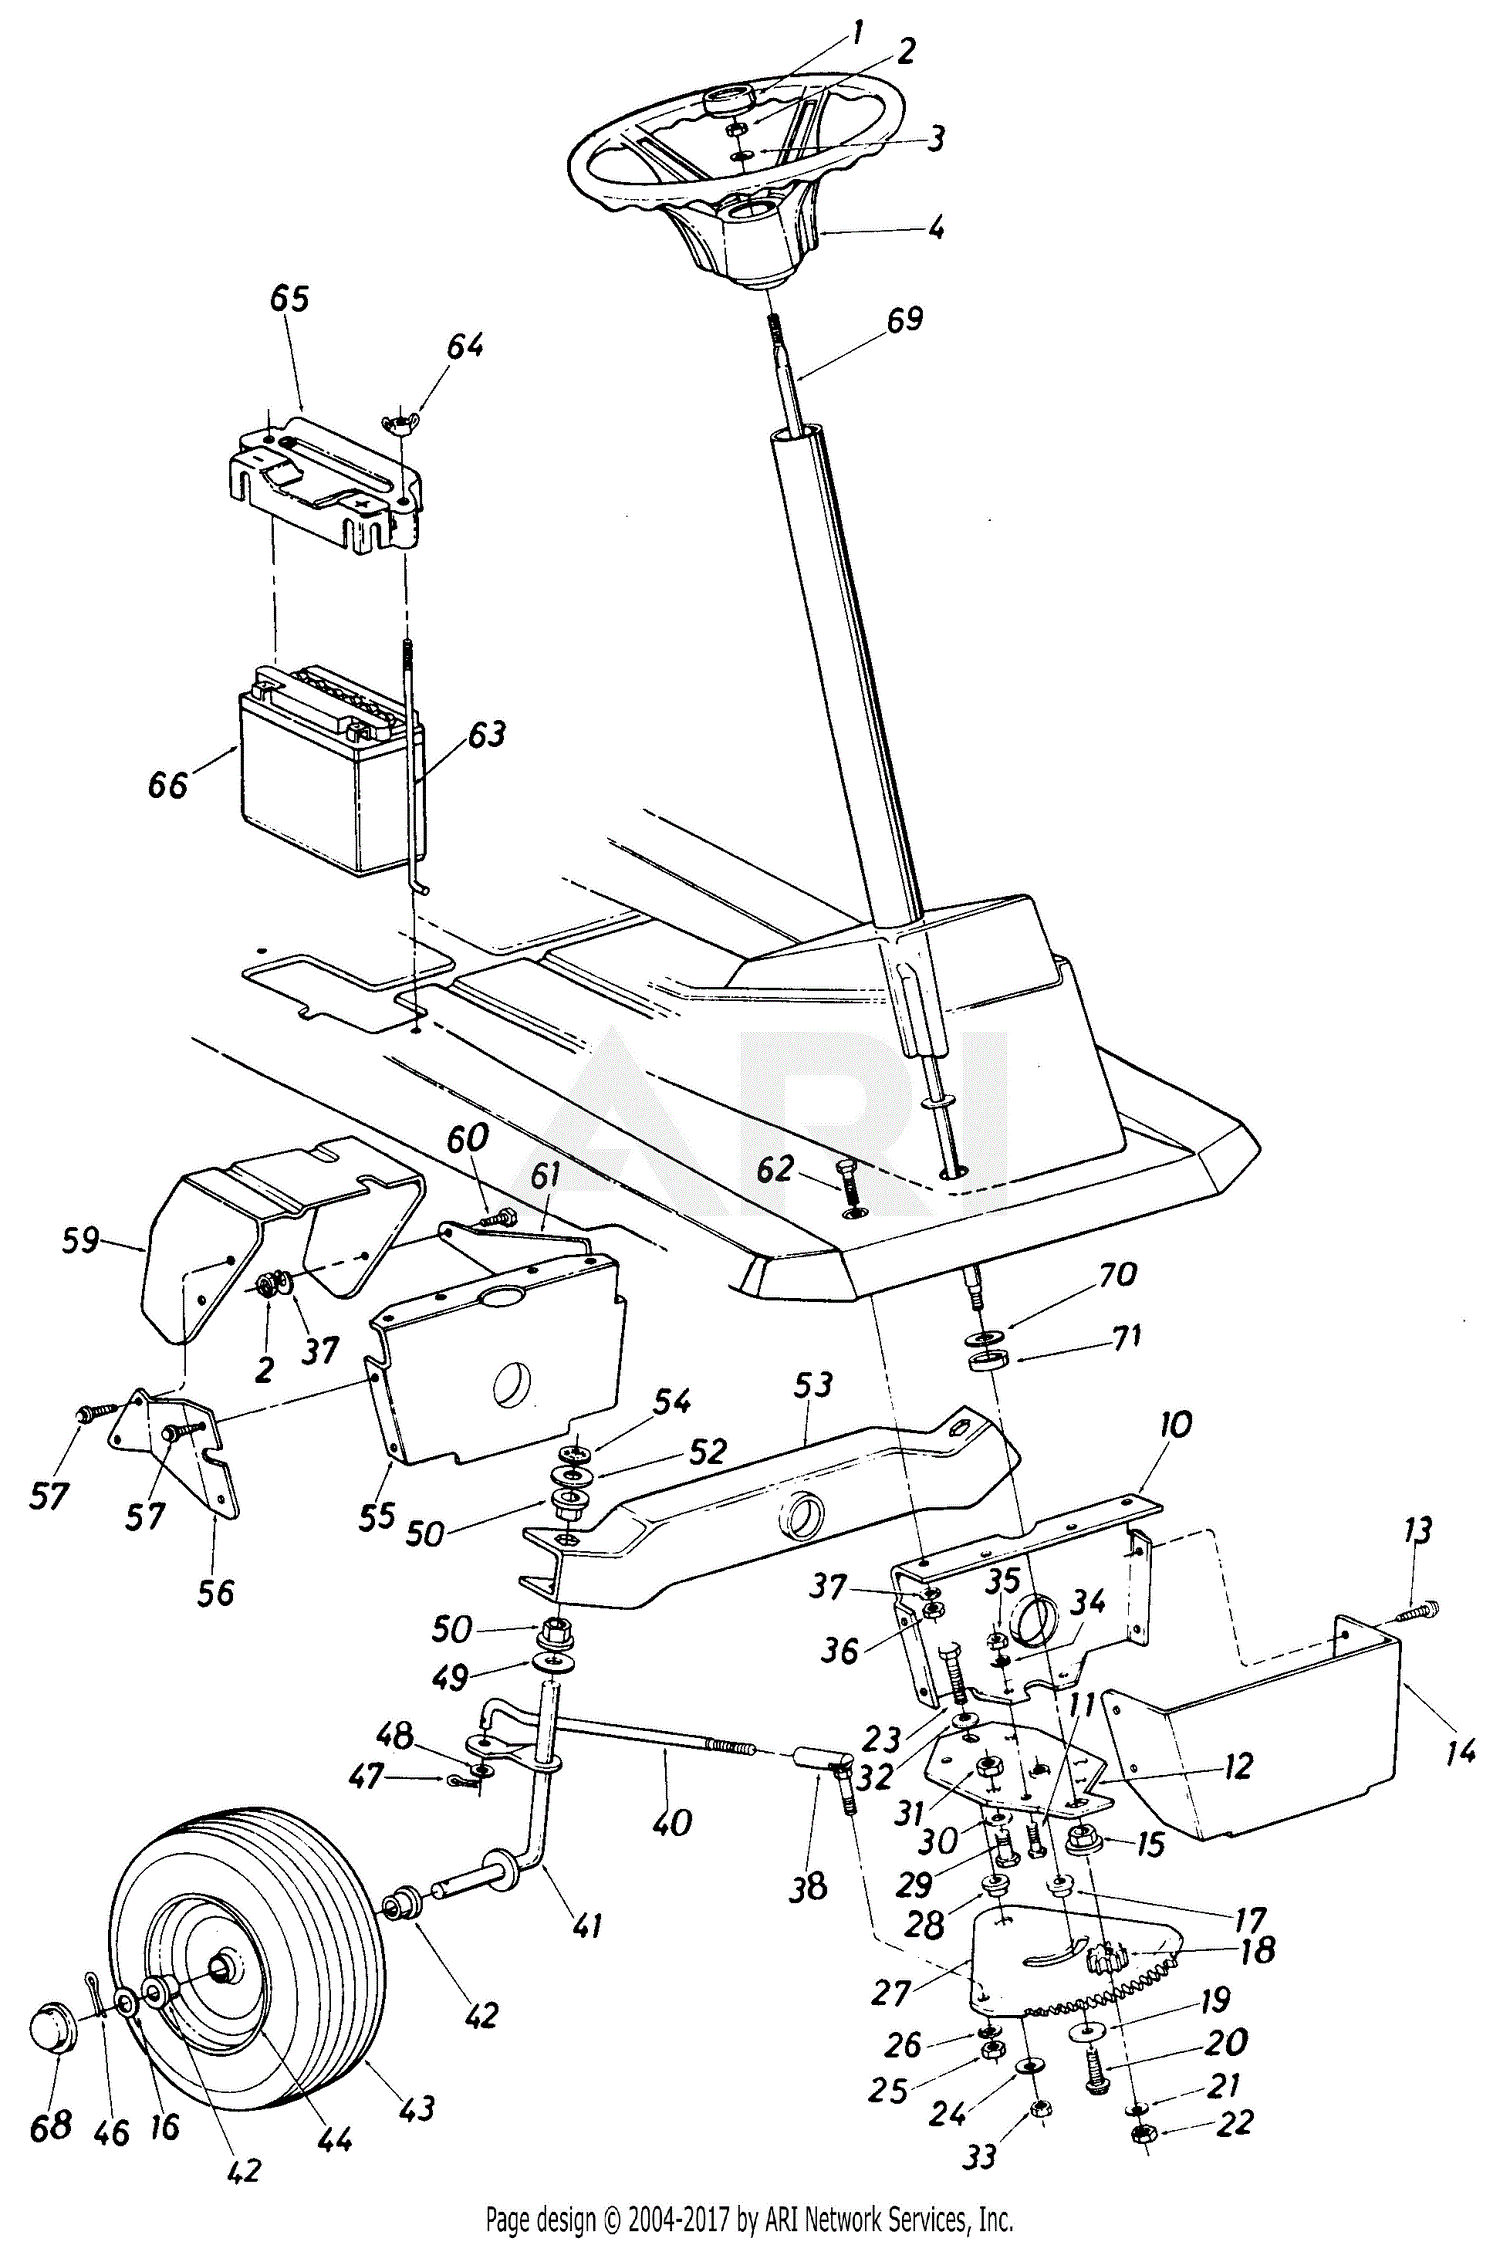 Murray 30 Inch Riding Mower Parts Diagram